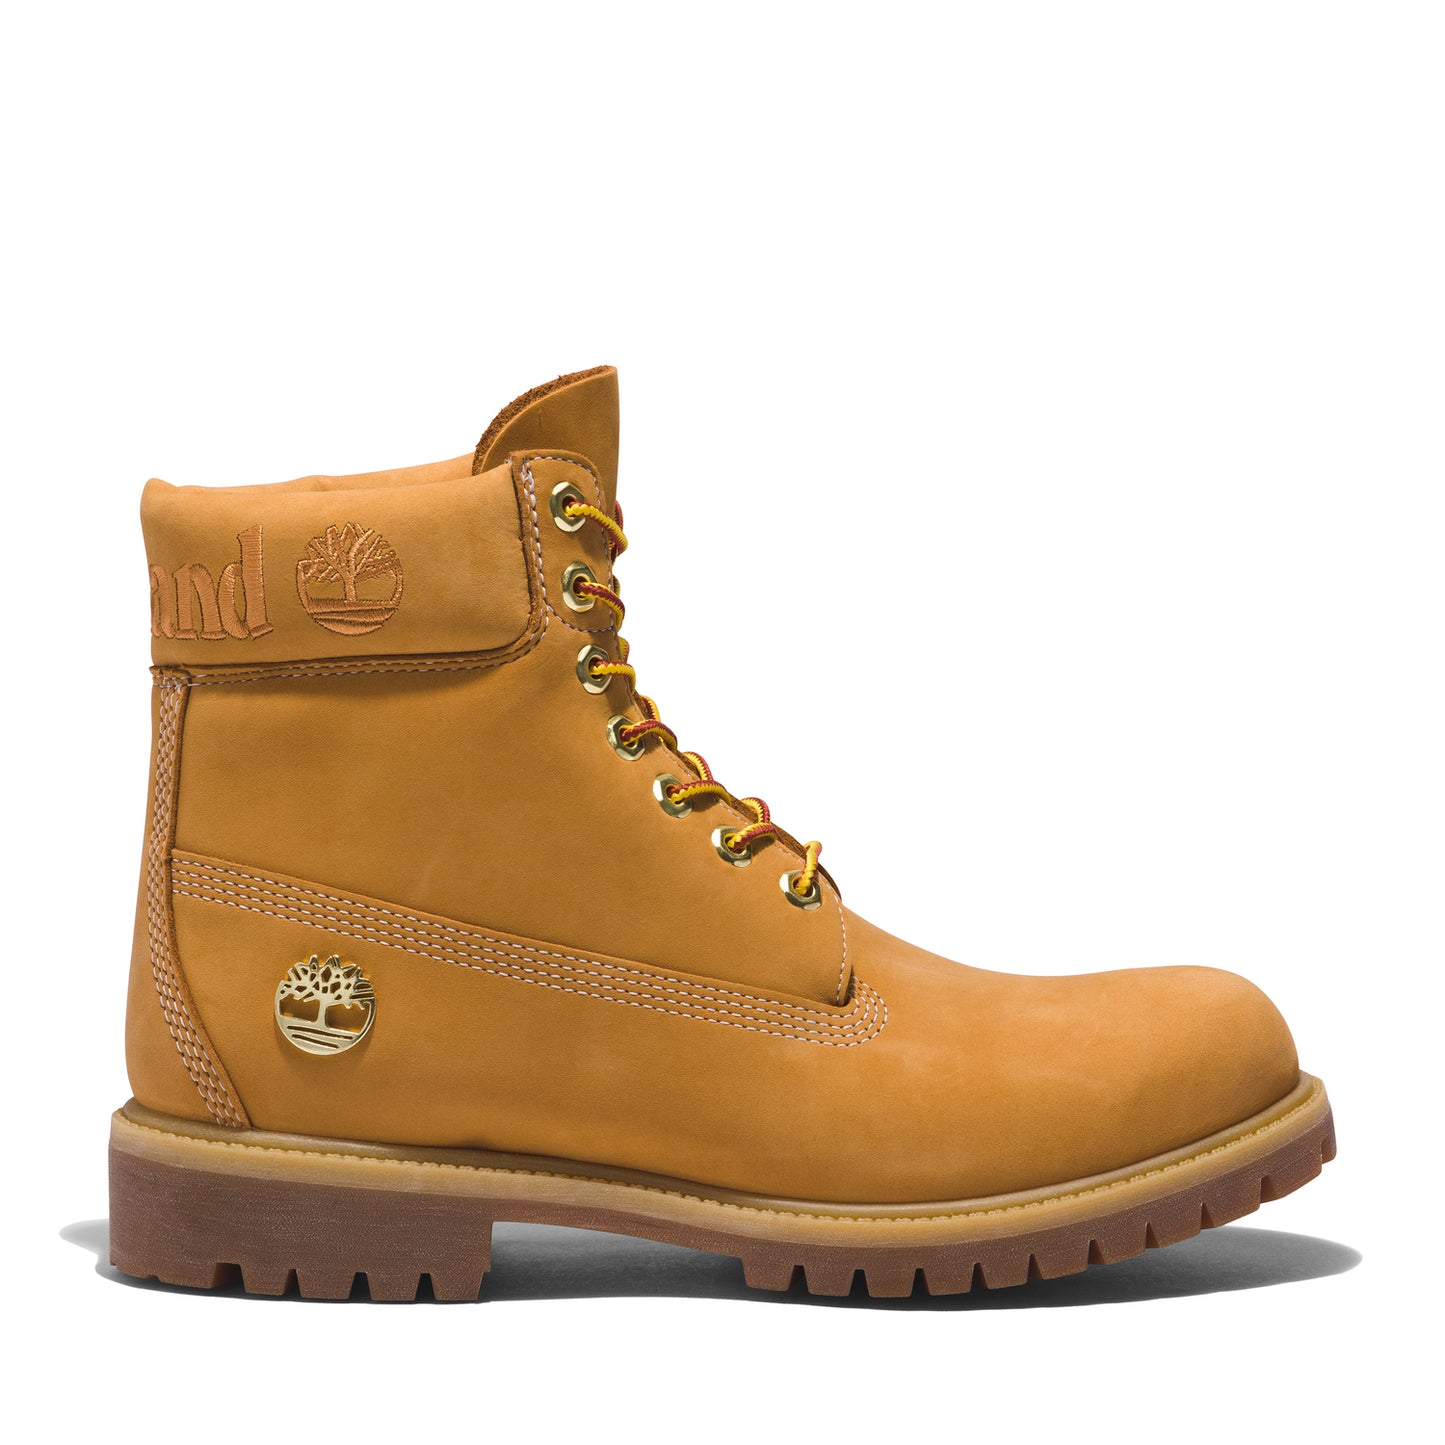 Mens 6-Inch Premium Waterproof Boot Wheat Nubuck Limited Edition GOLD BADGE - (TB0A5PJP 231) - PY- R2L17